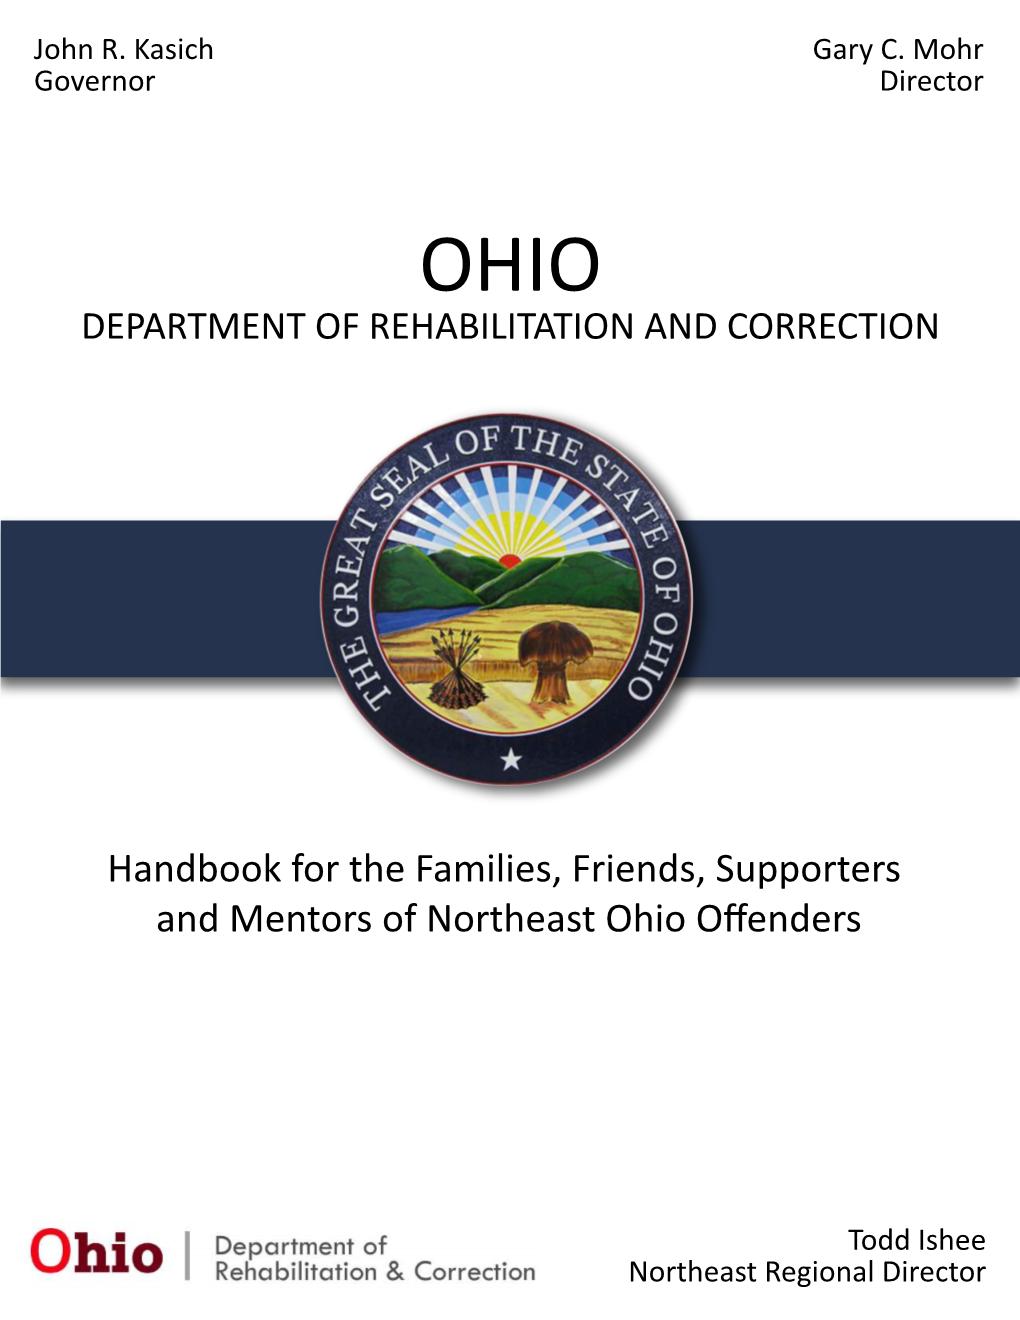 Handbook for the Families, Friends, Supporters and Mentors of Northeast Ohio Oﬀenders